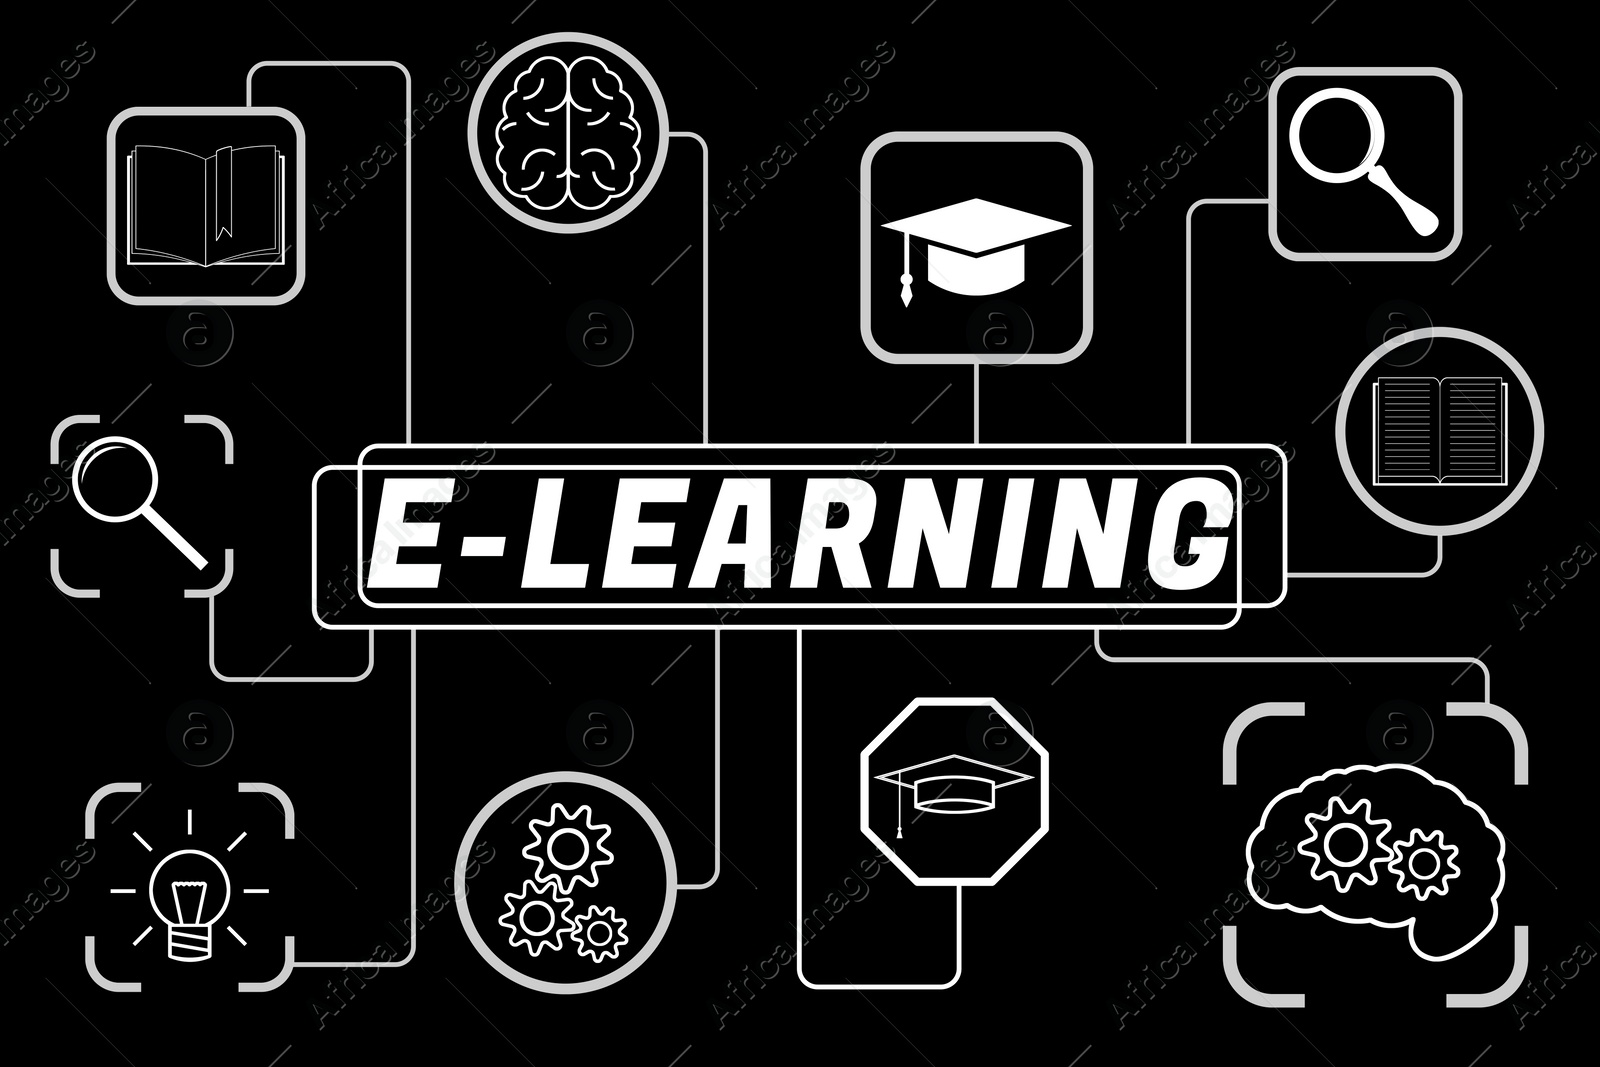 Image of E-learning. Scheme with icons on black background